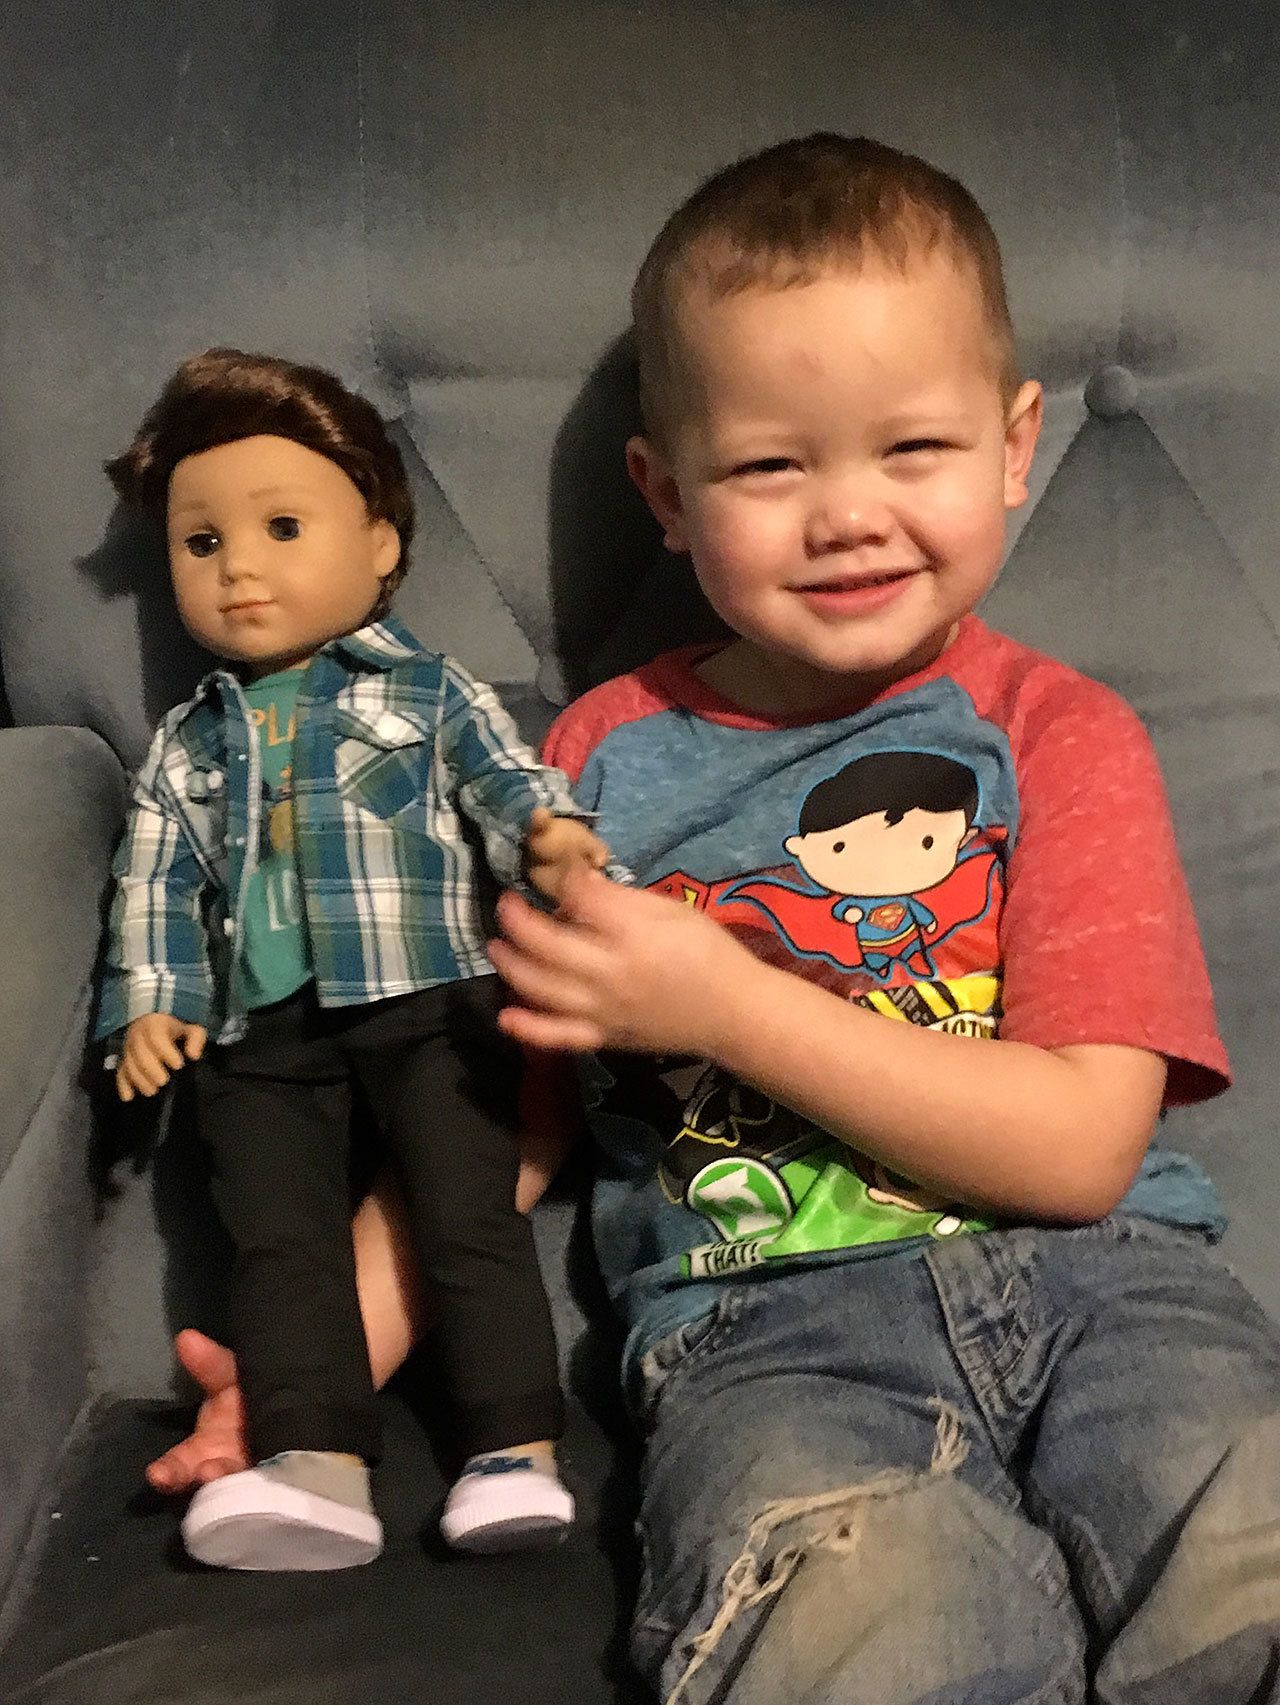 Logan Everett the doll with Everett-born Brandt Logan Glomski, 3, of Lake Stevens. His great-aunt bought him the first-ever boy American Girl doll. It’s the boy’s first doll and his mom said the two are inseparable. (Photo by Barbara Nitta)